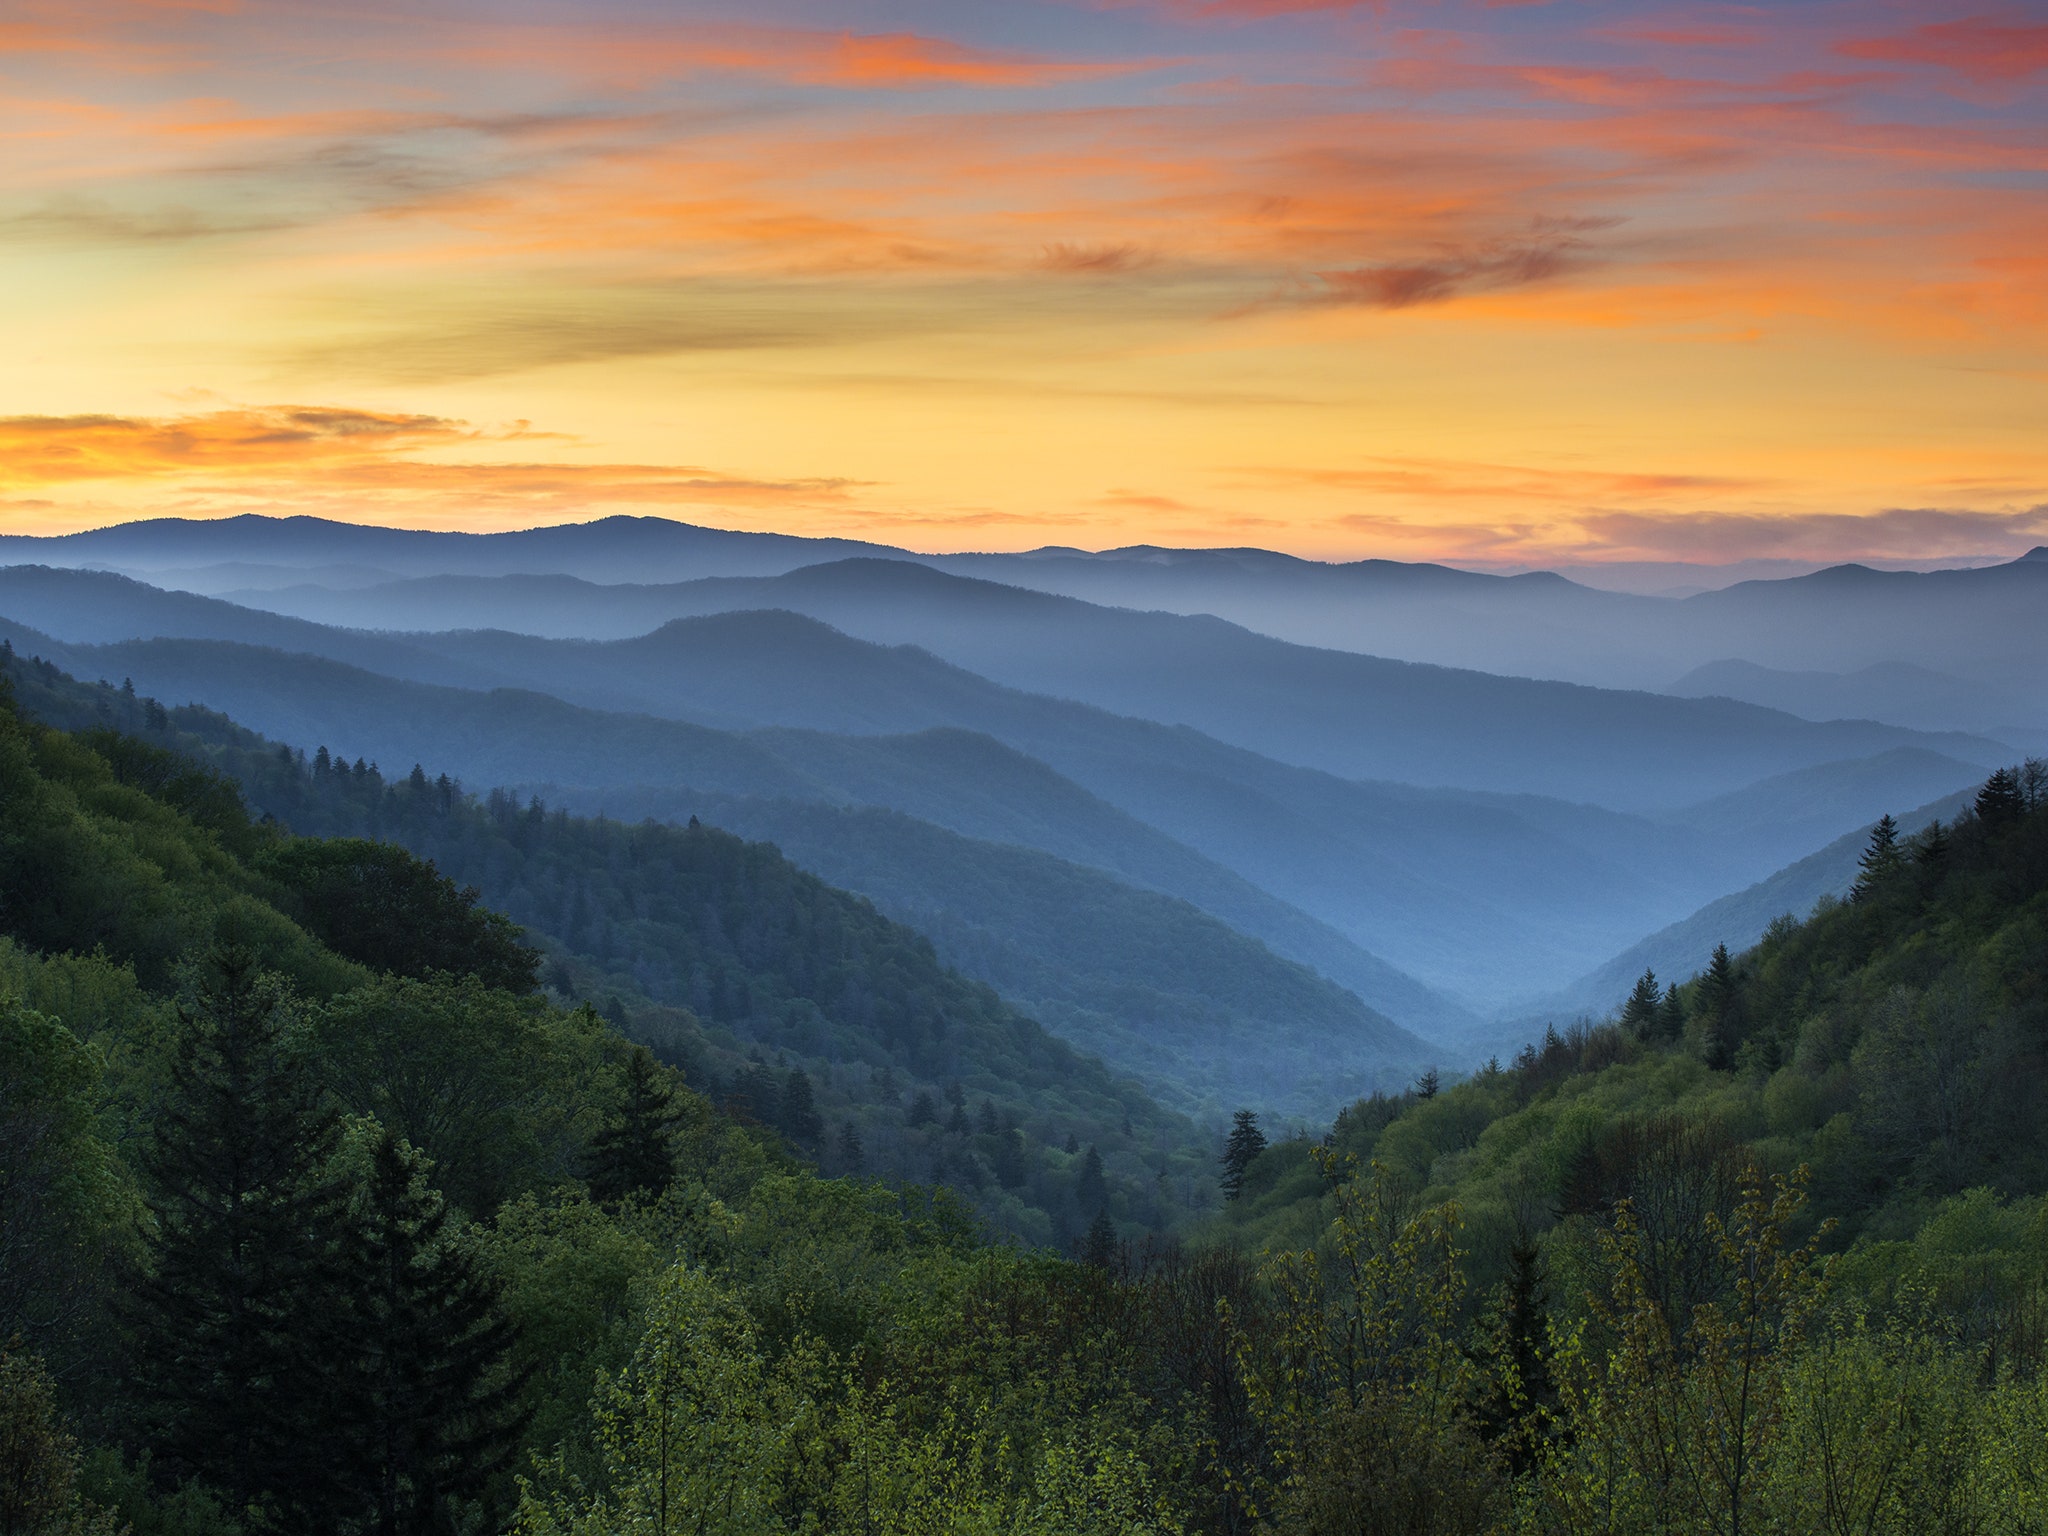 <p>The <a href="http://www.blueridgeparkway.org">Blue Ridge Parkway</a> runs for almost 500 miles through Virginia and North Carolina, along a picturesque route that’s lined by the soft green valleys descending from the Blue Ridge Mountains, and connecting the <a href="https://www.cntraveler.com/gallery/the-59-us-national-parks-in-photos?mbid=synd_msn_rss&utm_source=msn&utm_medium=syndication">Shenandoah and Great Smoky Mountains national parks</a> at either end. Heavy mist wreaths the landscape at dawn and dusk, thanks to the altitude, so take care when driving—that fog is often denser than it looks, and the looping, hilly route demands extra attention. Allow extra time to cover the distance, too, as the speed limit on most stretches is just 45 mph.</p> <p><strong>Where to stop:</strong> This was once moonshine territory, so it’s fitting that the region is now a craft distilling hub. Try the moonshine-inspired whiskey from <a href="http://www.defiantwhisky.com/">Blue Ridge Distilling</a>, which shortcuts the aging process by stirring shards of toasted American white oak directly into the spirit conferring a smoky richness in less than a week. In Asheville, <a href="http://www.ashevilledistilling.com">distiller Troy Ball</a> is known for using an old corn varietal, known as Crooked Creek, whose high fat content rounds out the spirit beautifully.</p> <p><strong>Where to eat:</strong> The superb farmland nearby has drawn chefs to Asheville in increasing numbers, whether El Bulli-trained Katie Button, who owns <a href="https://katiebuttonrestaurants.com/">two spots there</a>, or this year’s James Beard Best Chef semifinalist Meherwan Irani, who has a mini empire of <a href="http://www.chaipaniasheville.com/our-team">Indian restaurants</a> in the area.</p> <p><strong>Where to stay:</strong> Detour off slightly to Pigeon Forge, Tennessee, home of Dollywood, the kitschy theme park owned by Parton herself, and hunker down in <a href="https://www.dollywood.com/Cabins">one of the cabins there</a>. You can also look for a sweet cabin rental <a href="https://www.cntraveler.com/gallery/best-airbnbs-in-north-carolina?mbid=synd_msn_rss&utm_source=msn&utm_medium=syndication">via Airbnb</a> along the way.</p><p>Sign up to receive the latest news, expert tips, and inspiration on all things travel</p><a href="https://www.cntraveler.com/newsletter/the-daily?sourceCode=msnsend">Inspire Me</a>